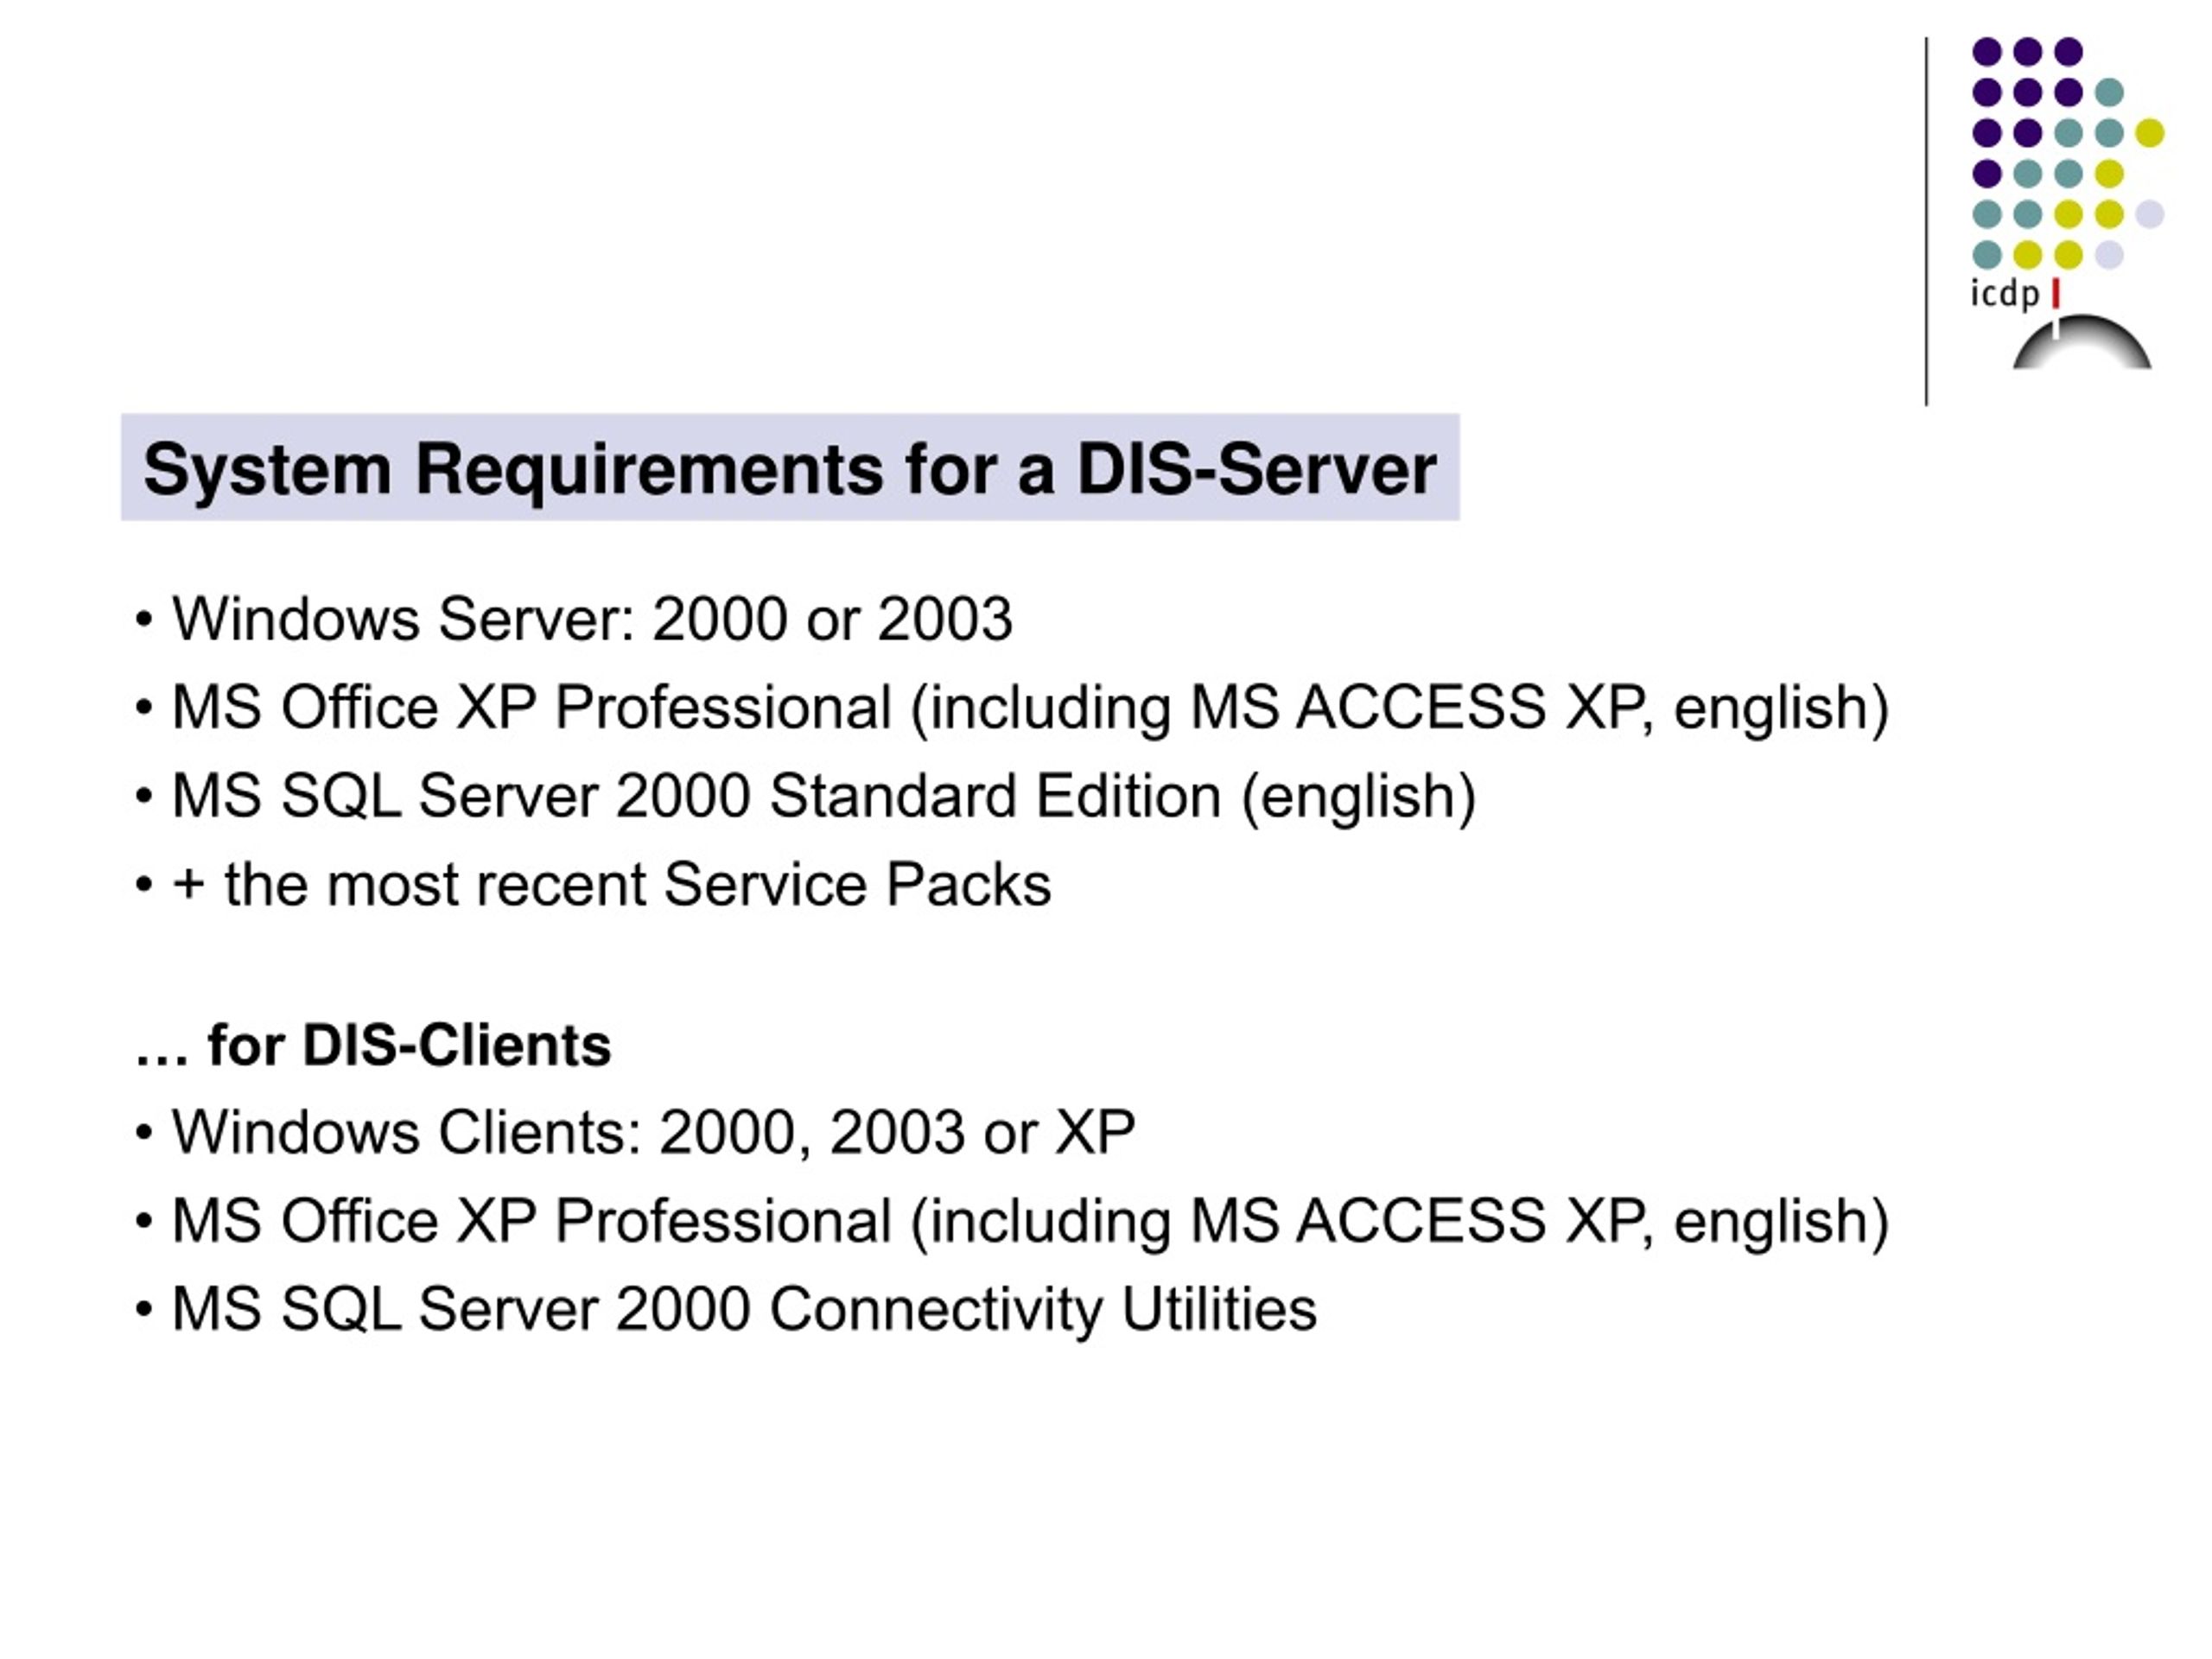 ms access system requirements